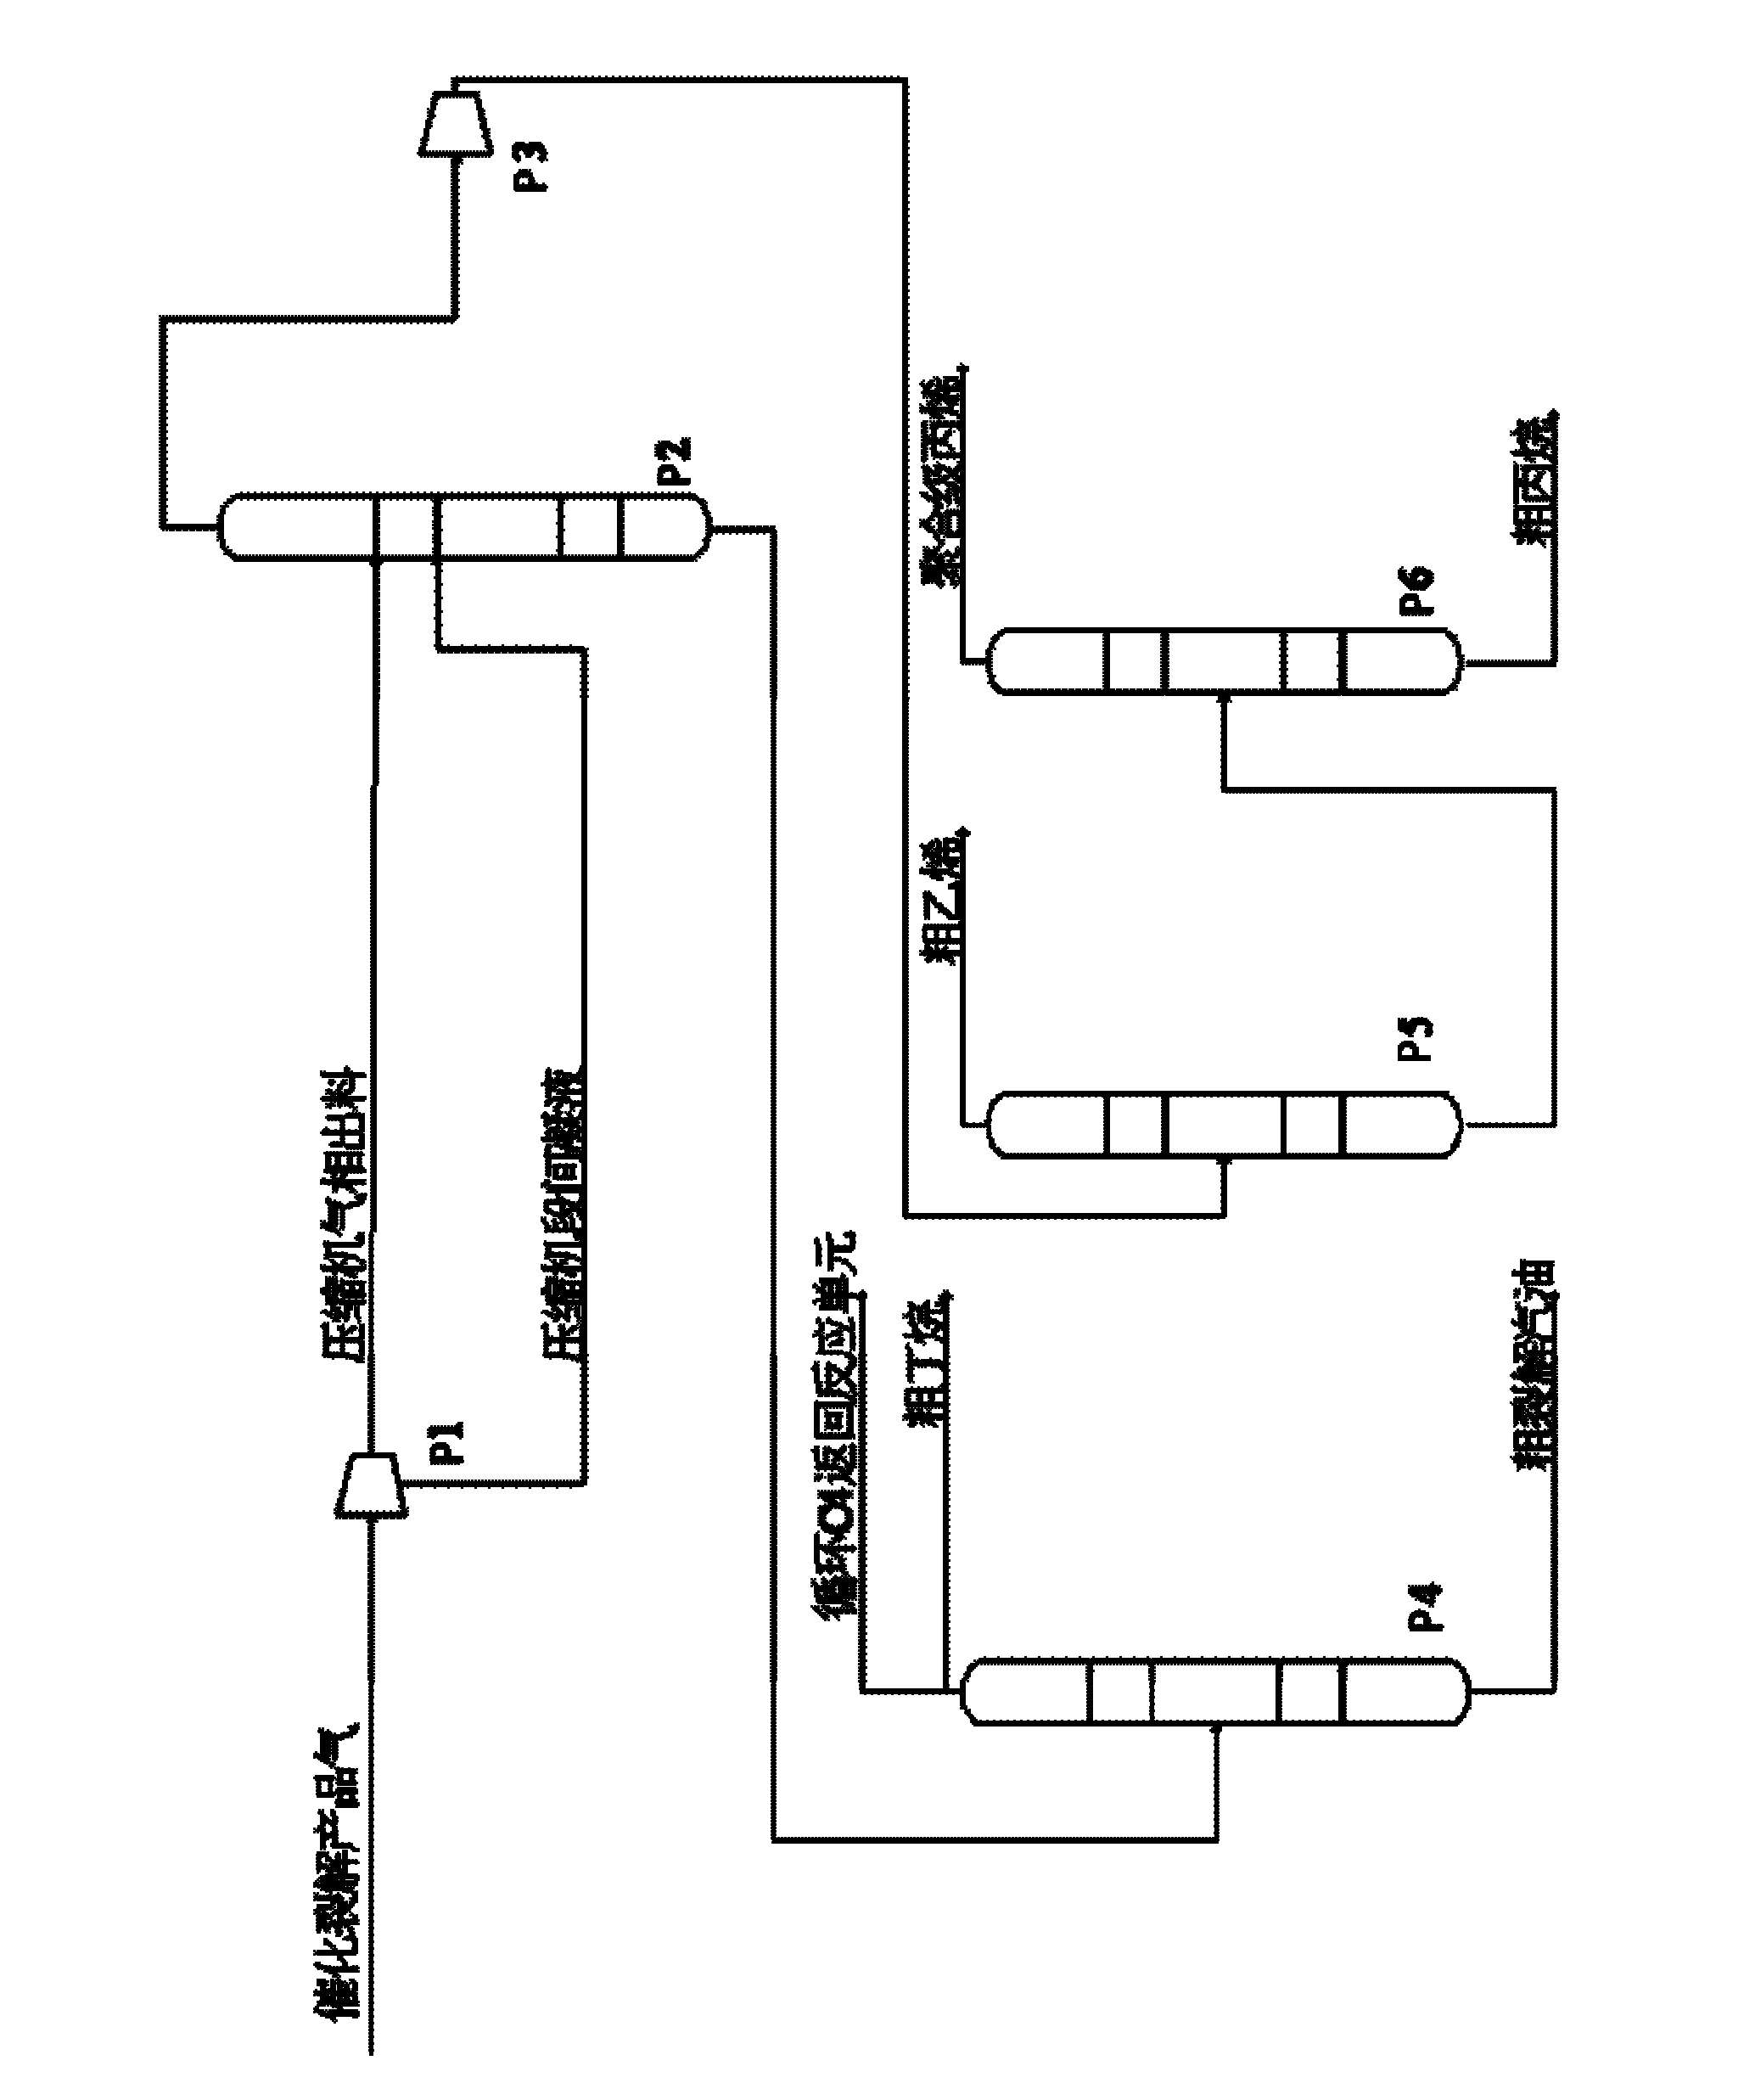 System and method for preparing polymer-grade propylene through absorption and separation of catalytic cracking product gas